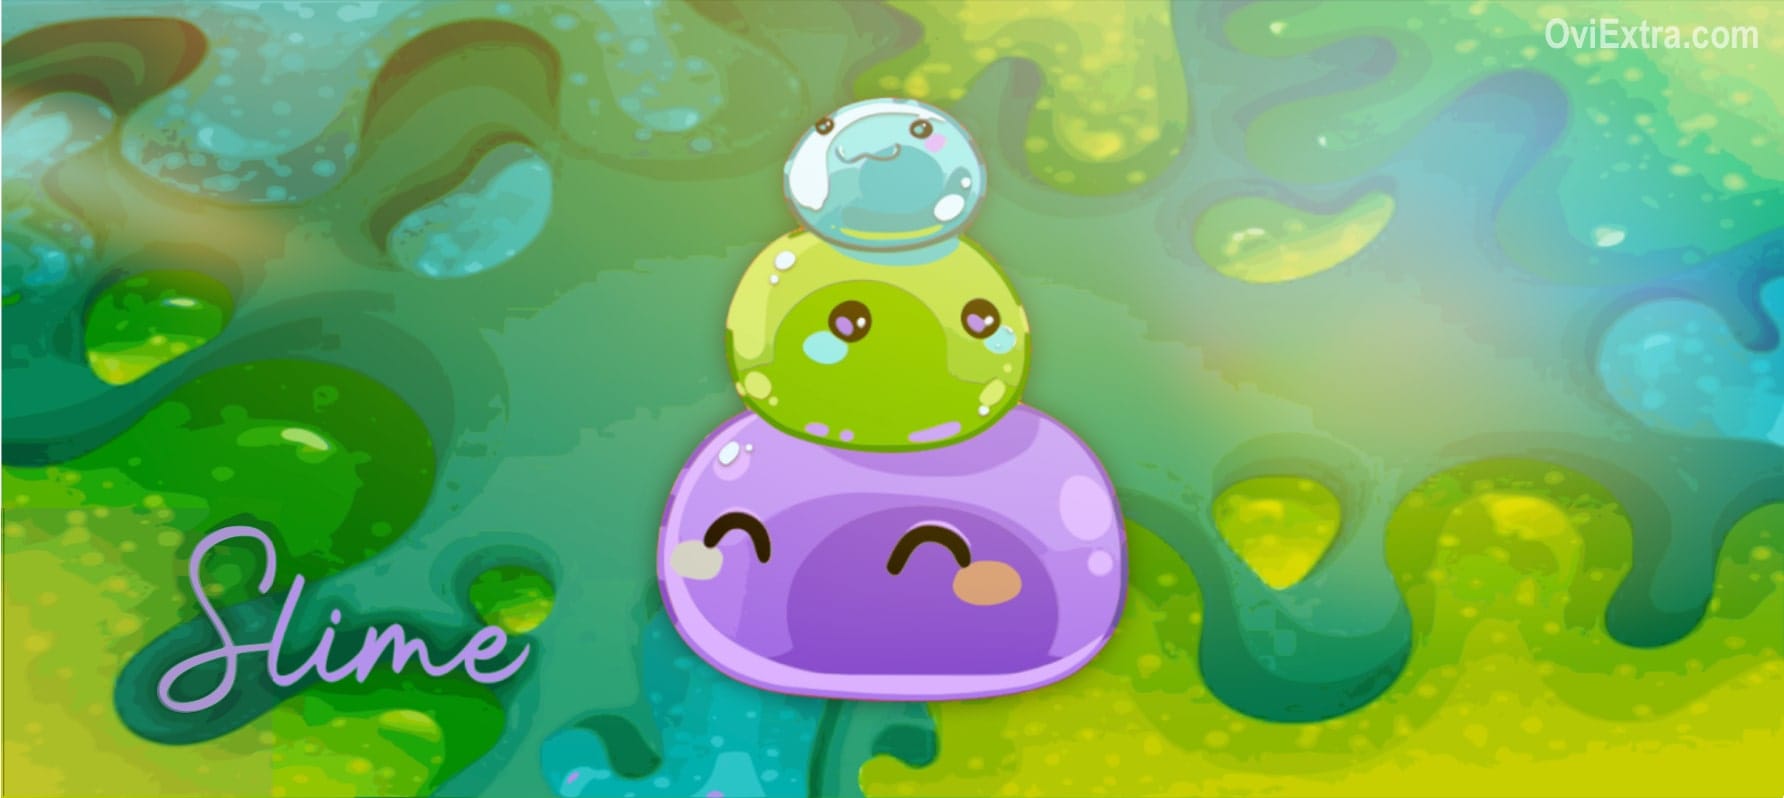 Slime away! OviPets introduces a new specie image